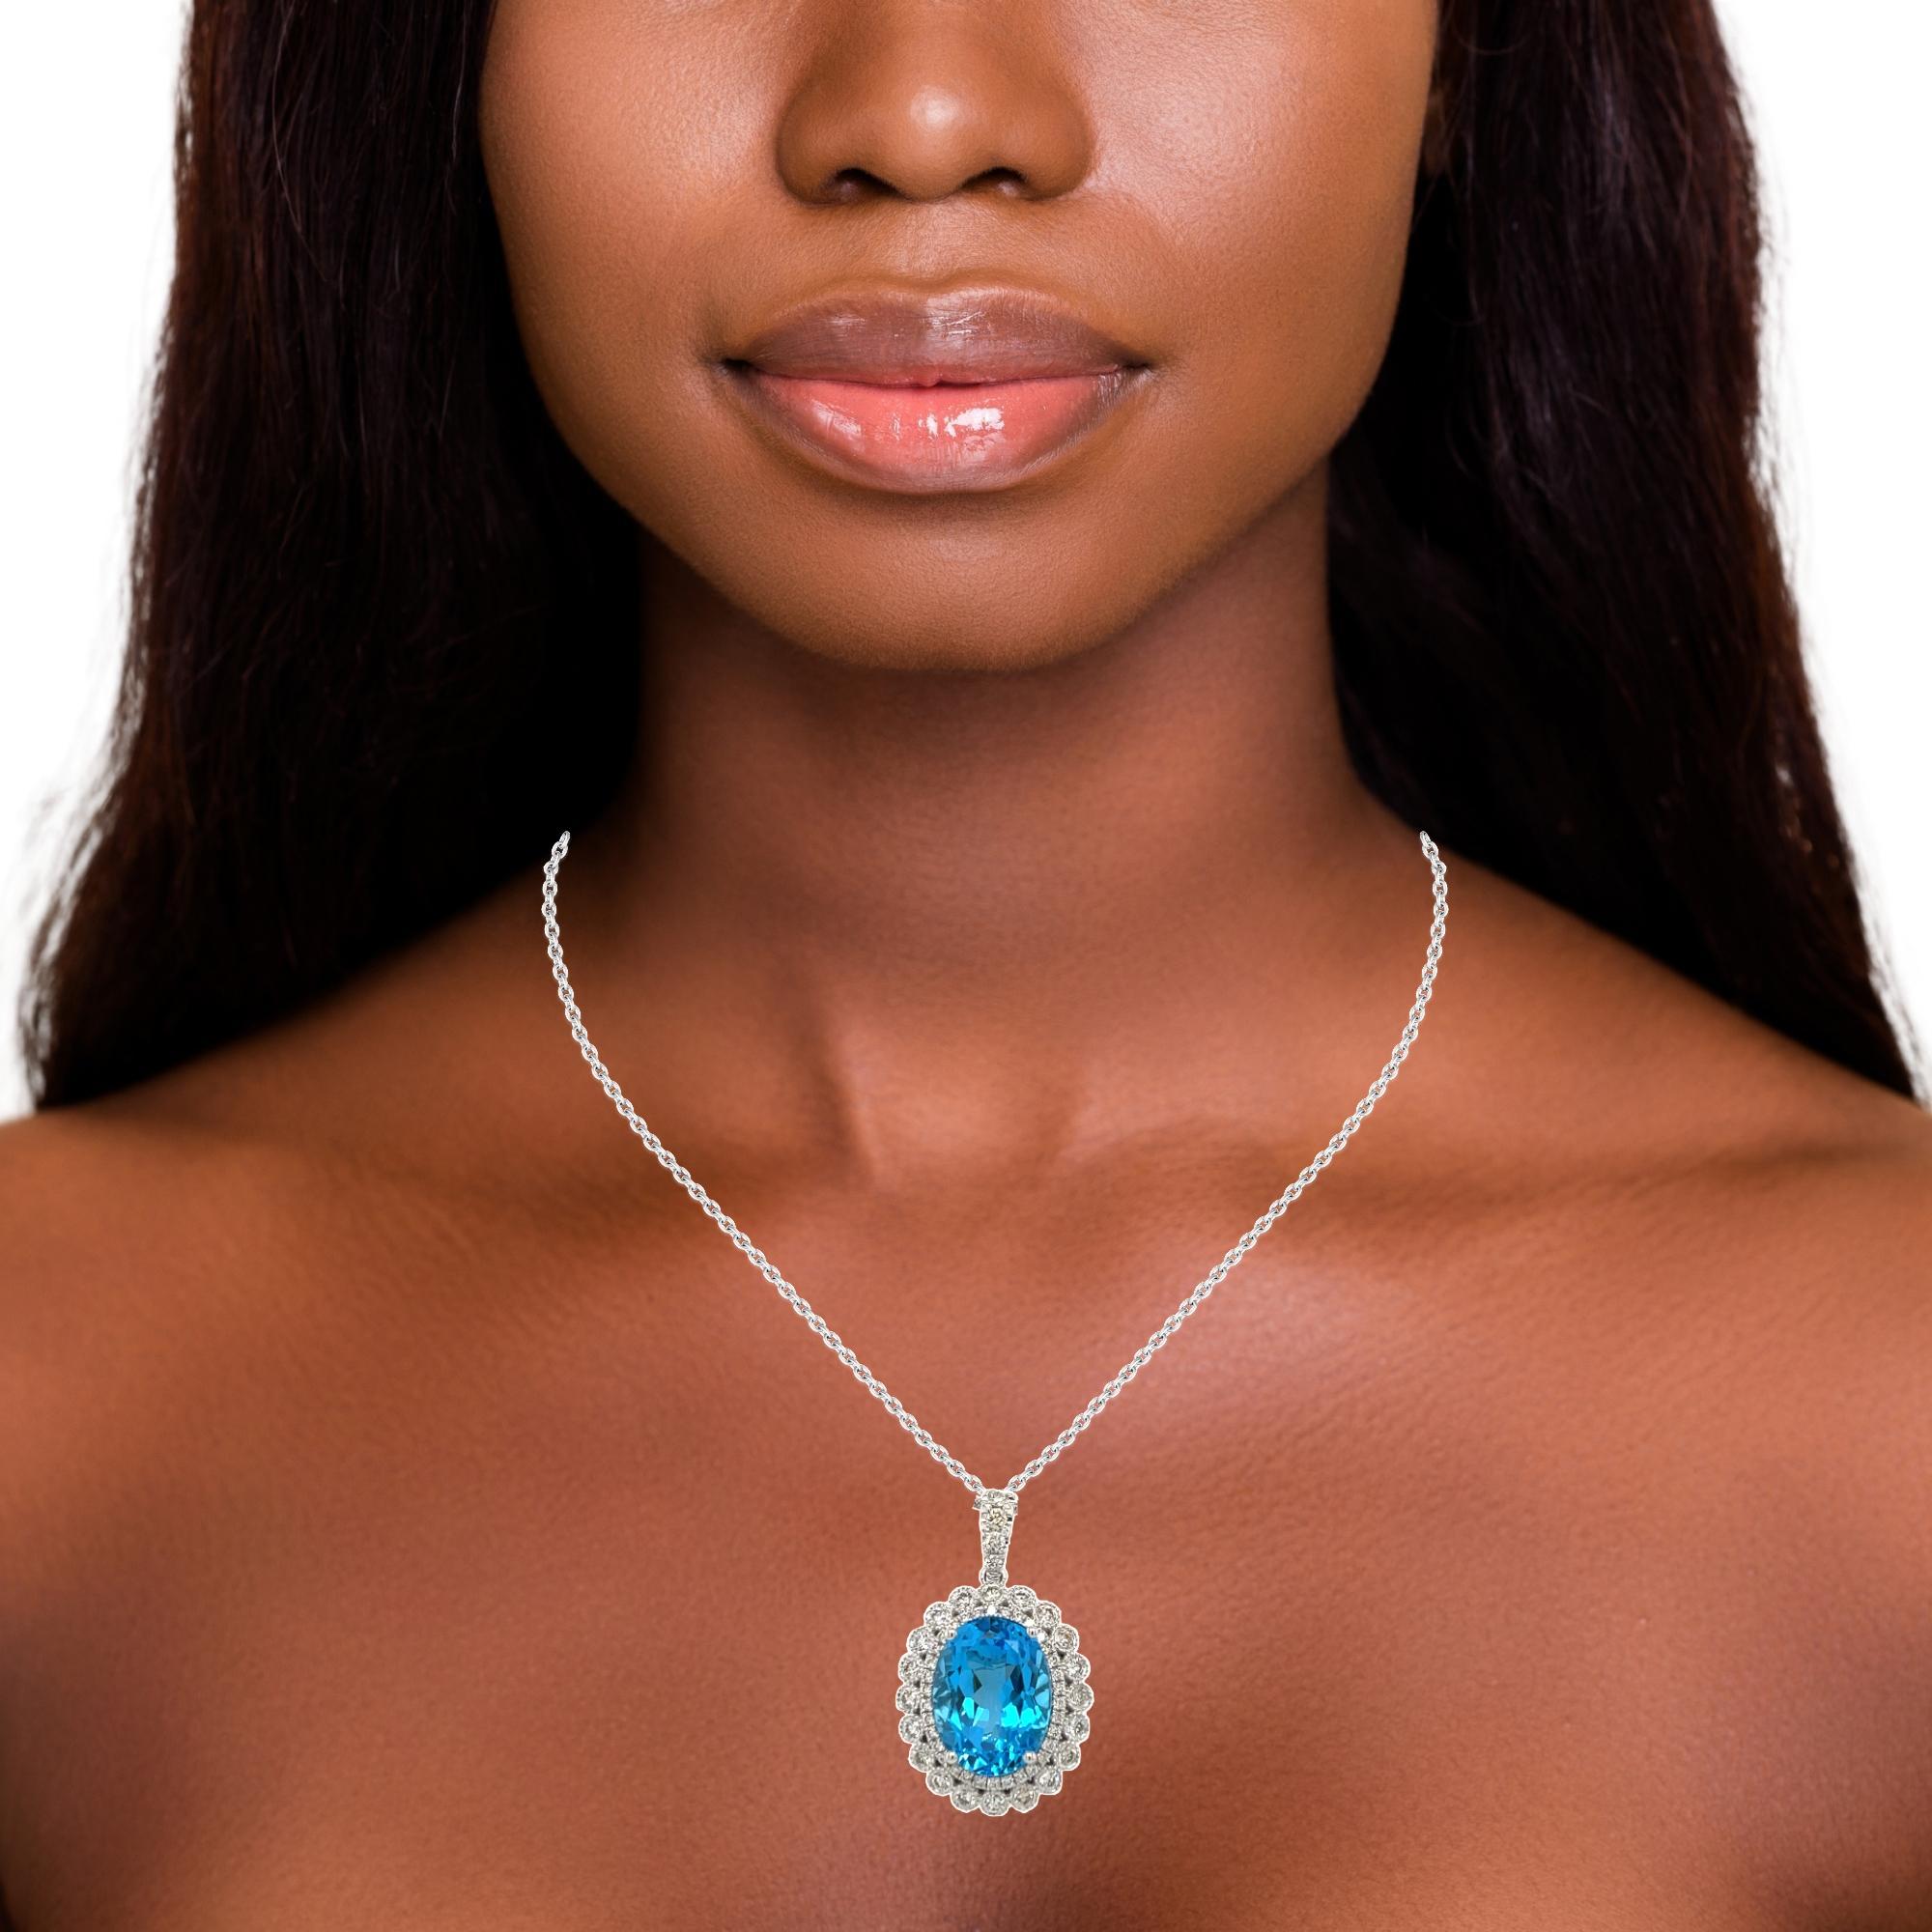 This stunning pendant has a 16x14 oval top quality Swiss Blue Topaz pendant surrounded by over 1 carat of 58 shimmery sparkling diamond. The Blue topaz is set in 14 karat white gold and comes with a white gold chain. It is brand new with detailed